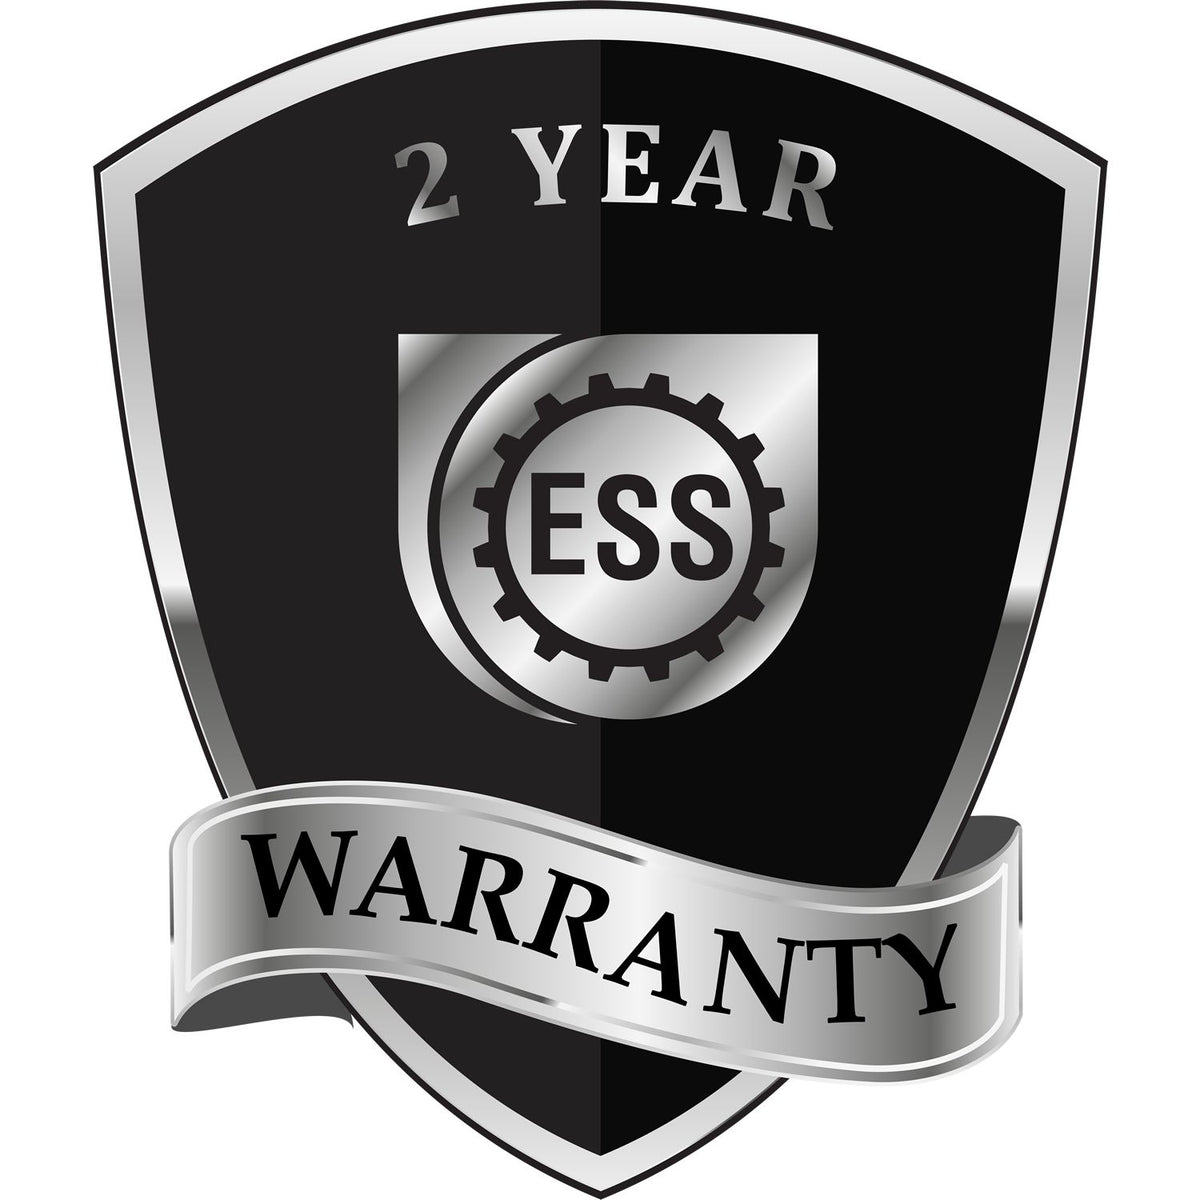 A black and silver badge or emblem showing warranty information for the Soft New York Professional Geologist Seal